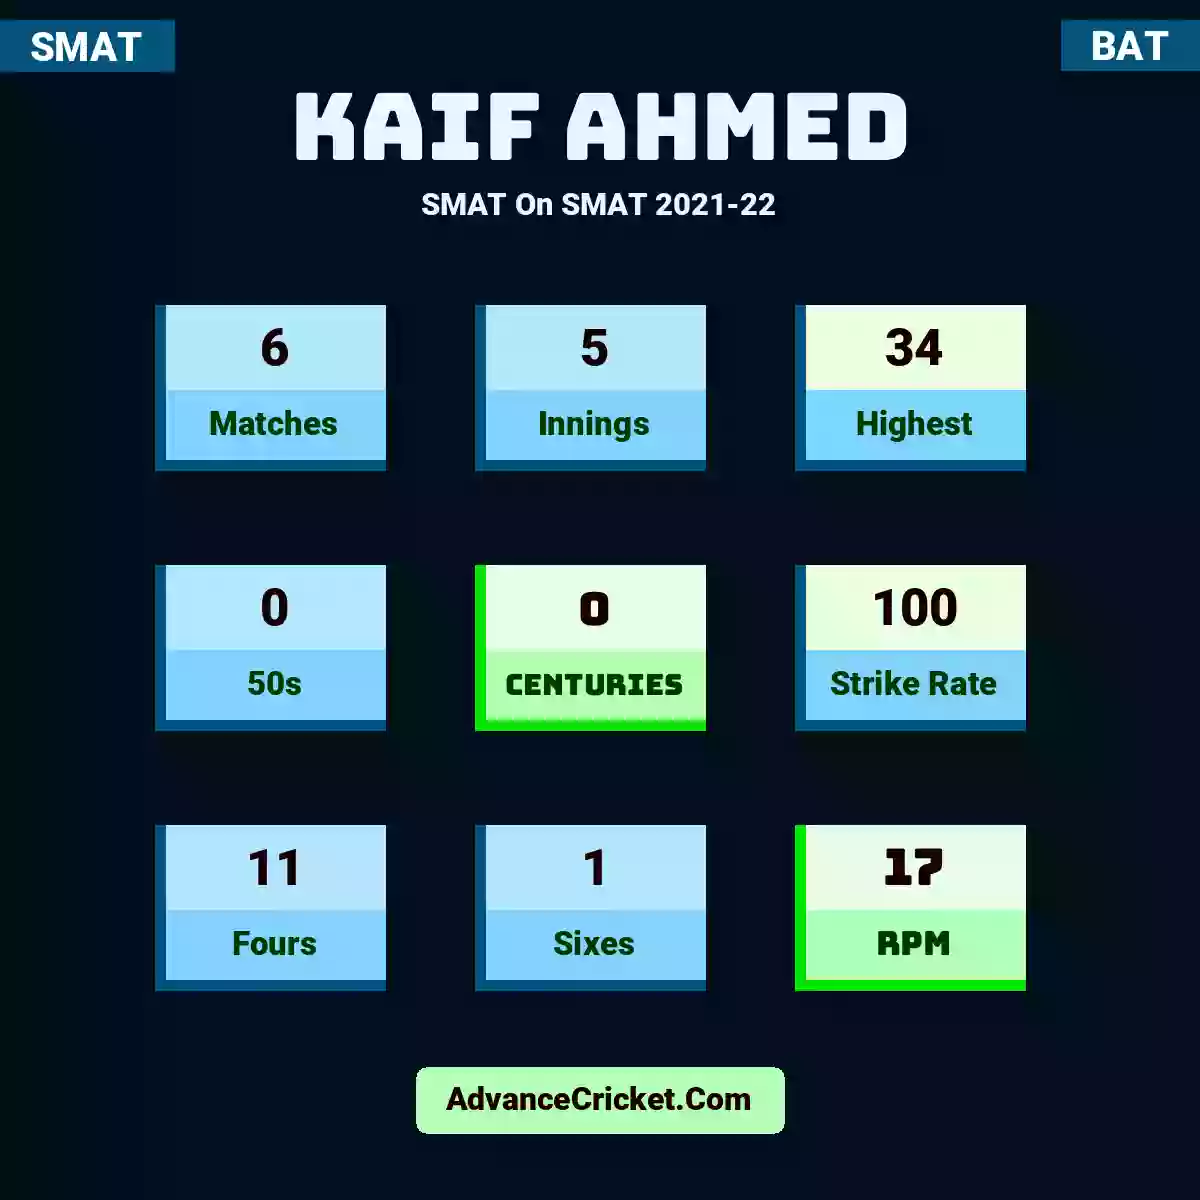 Kaif Ahmed SMAT  On SMAT 2021-22, Kaif Ahmed played 6 matches, scored 34 runs as highest, 0 half-centuries, and 0 centuries, with a strike rate of 100. K.Ahmed hit 11 fours and 1 sixes, with an RPM of 17.